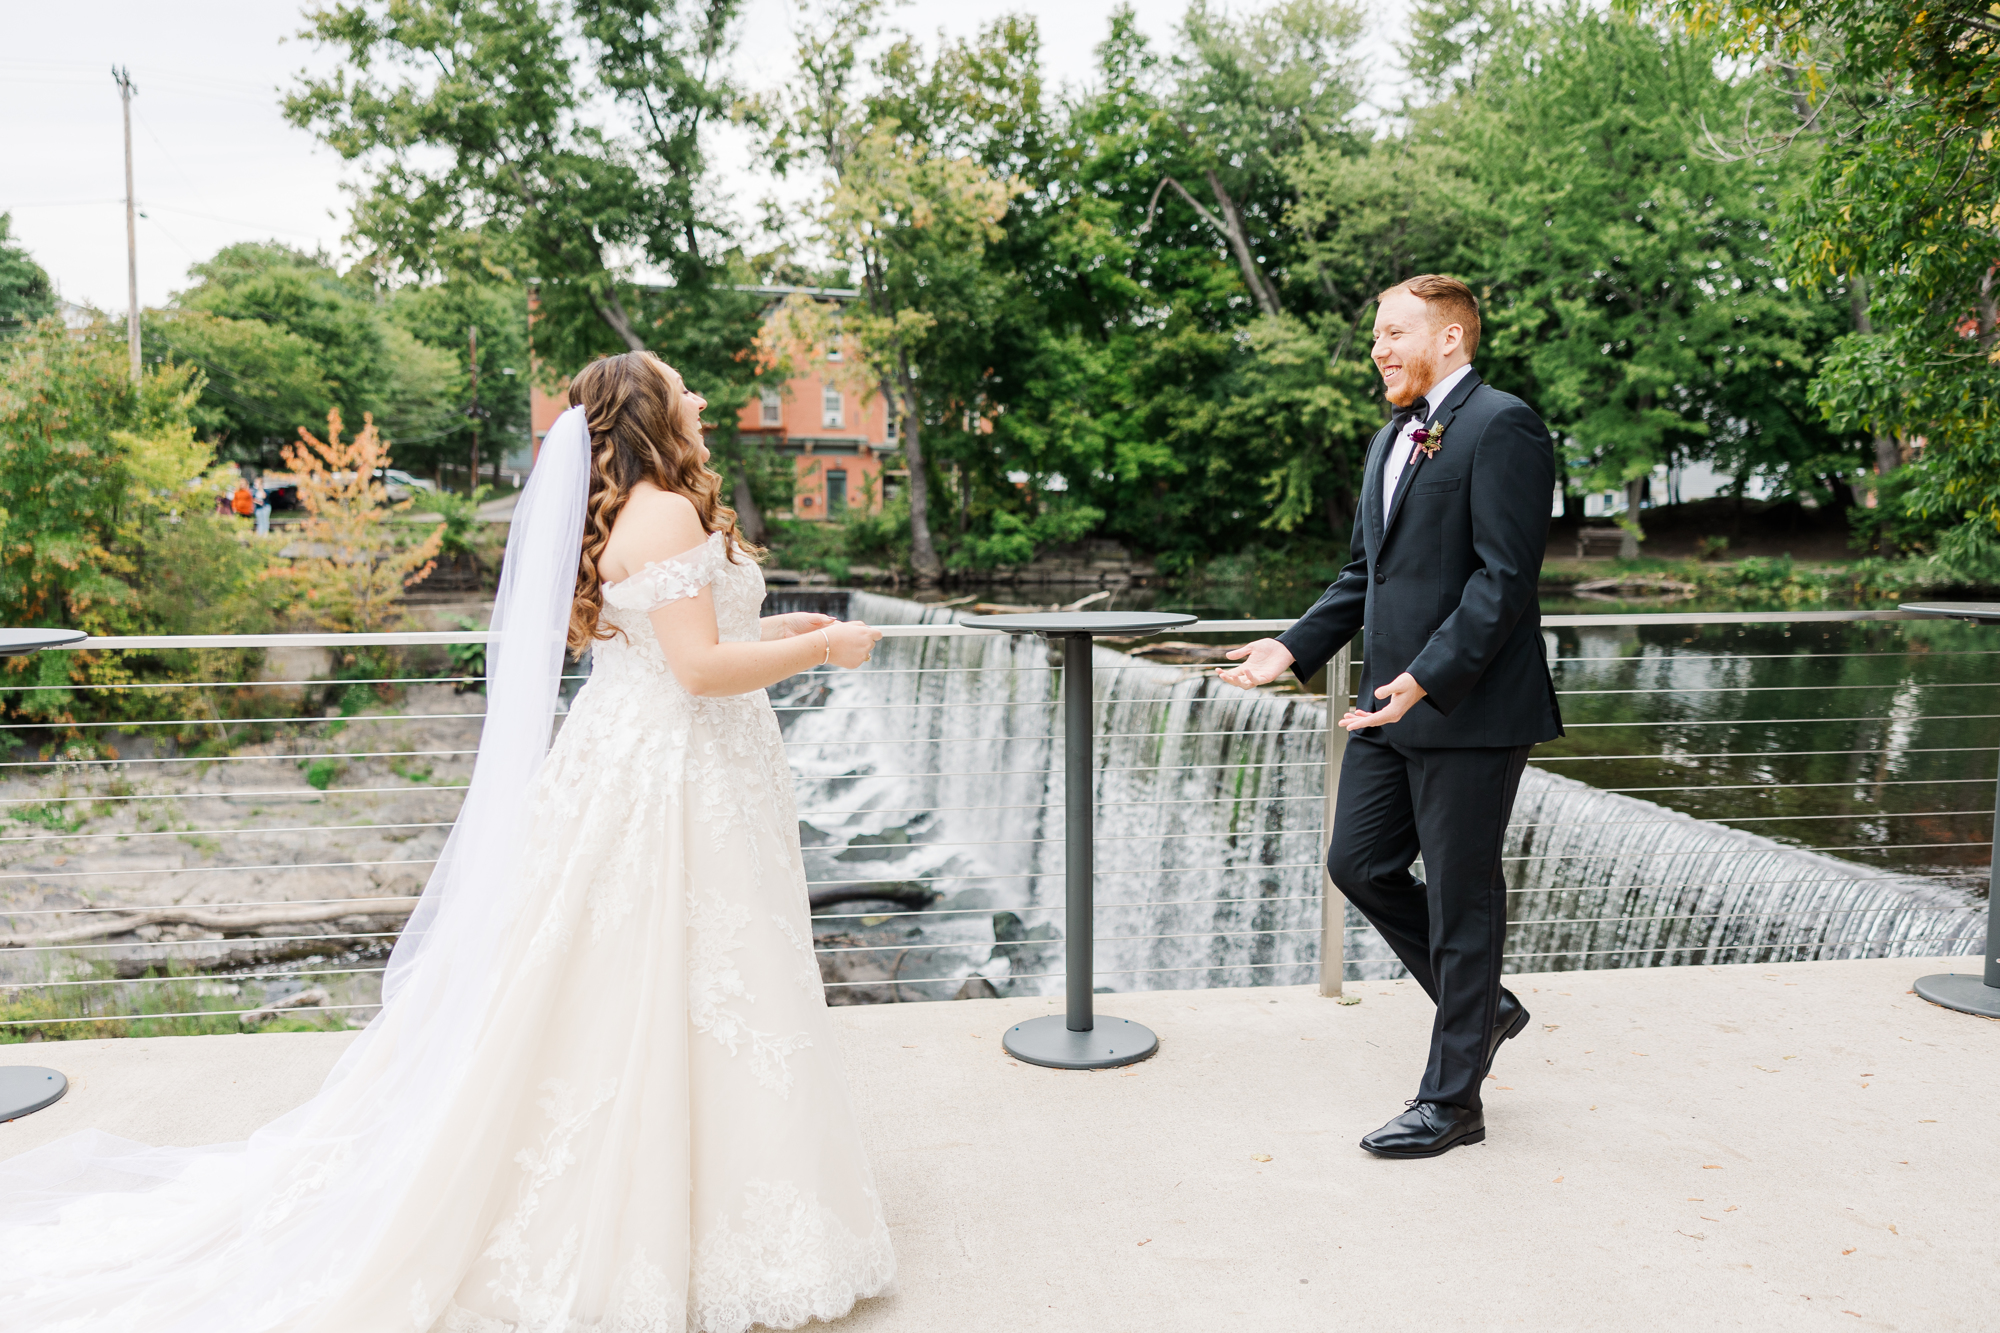 Candid Beacon Wedding at The Roundhouse, NY